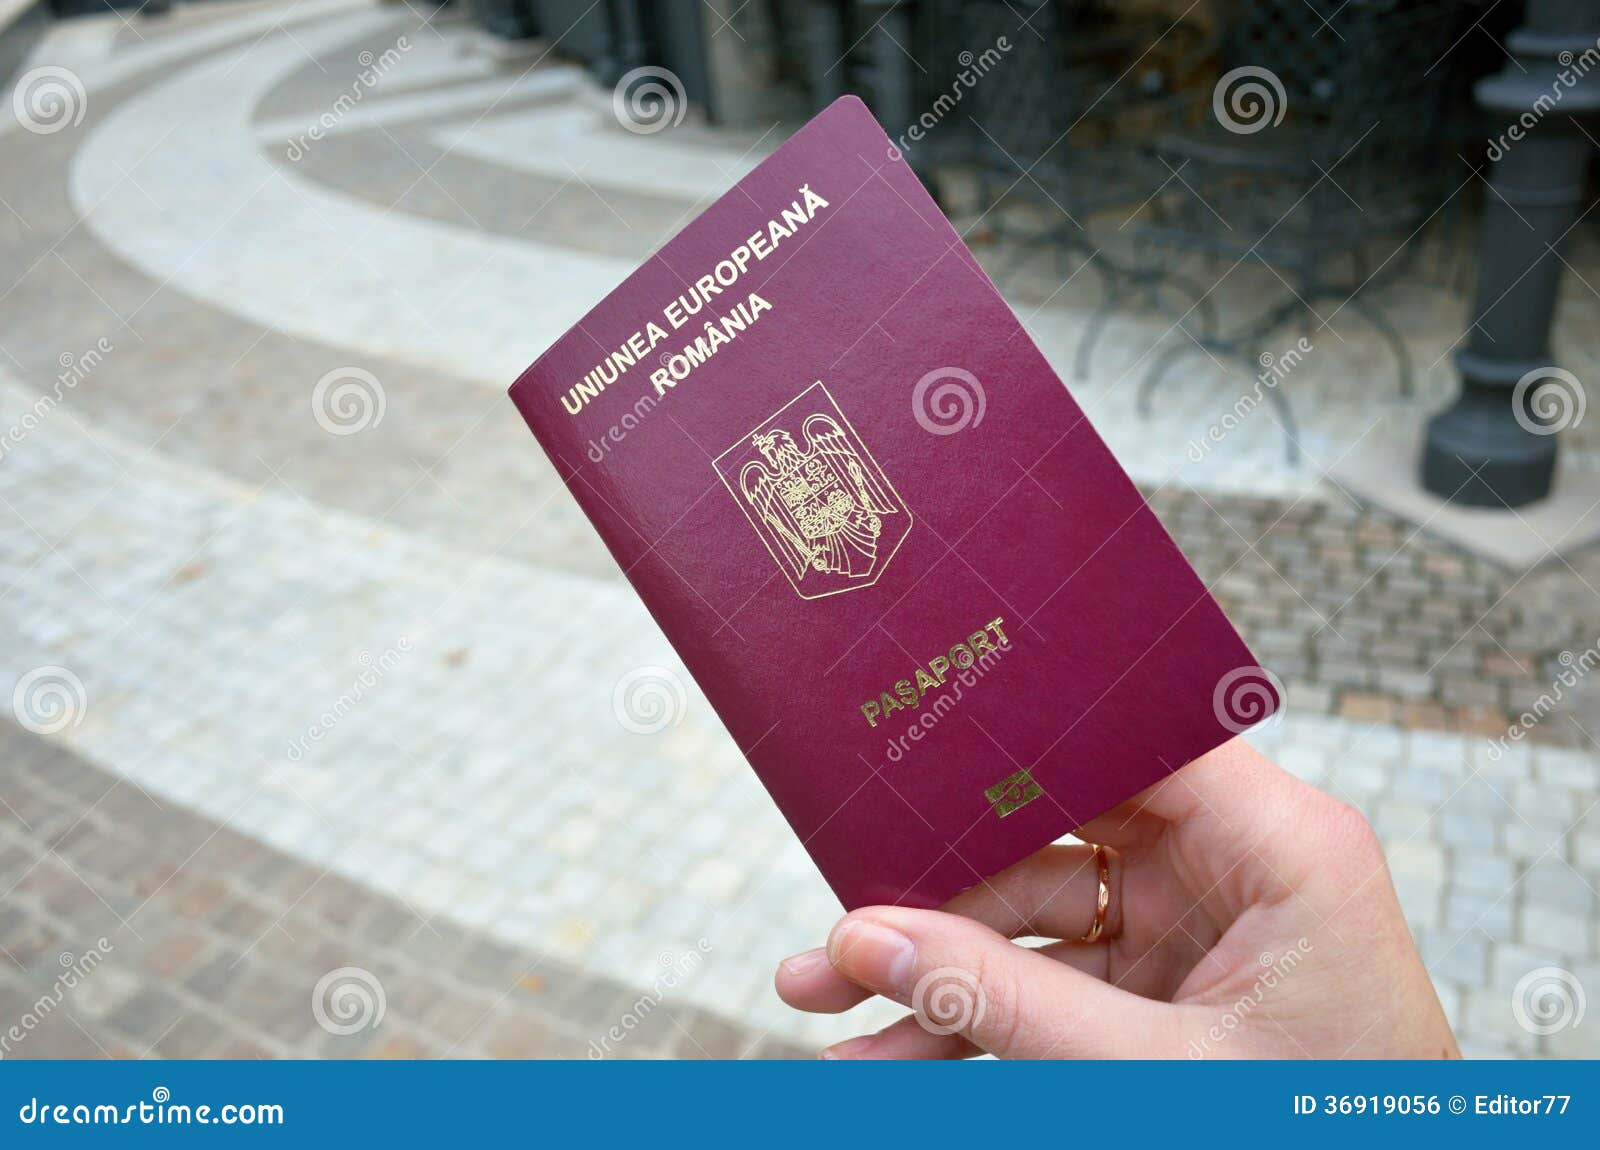 reservation of rights when signing a passport application